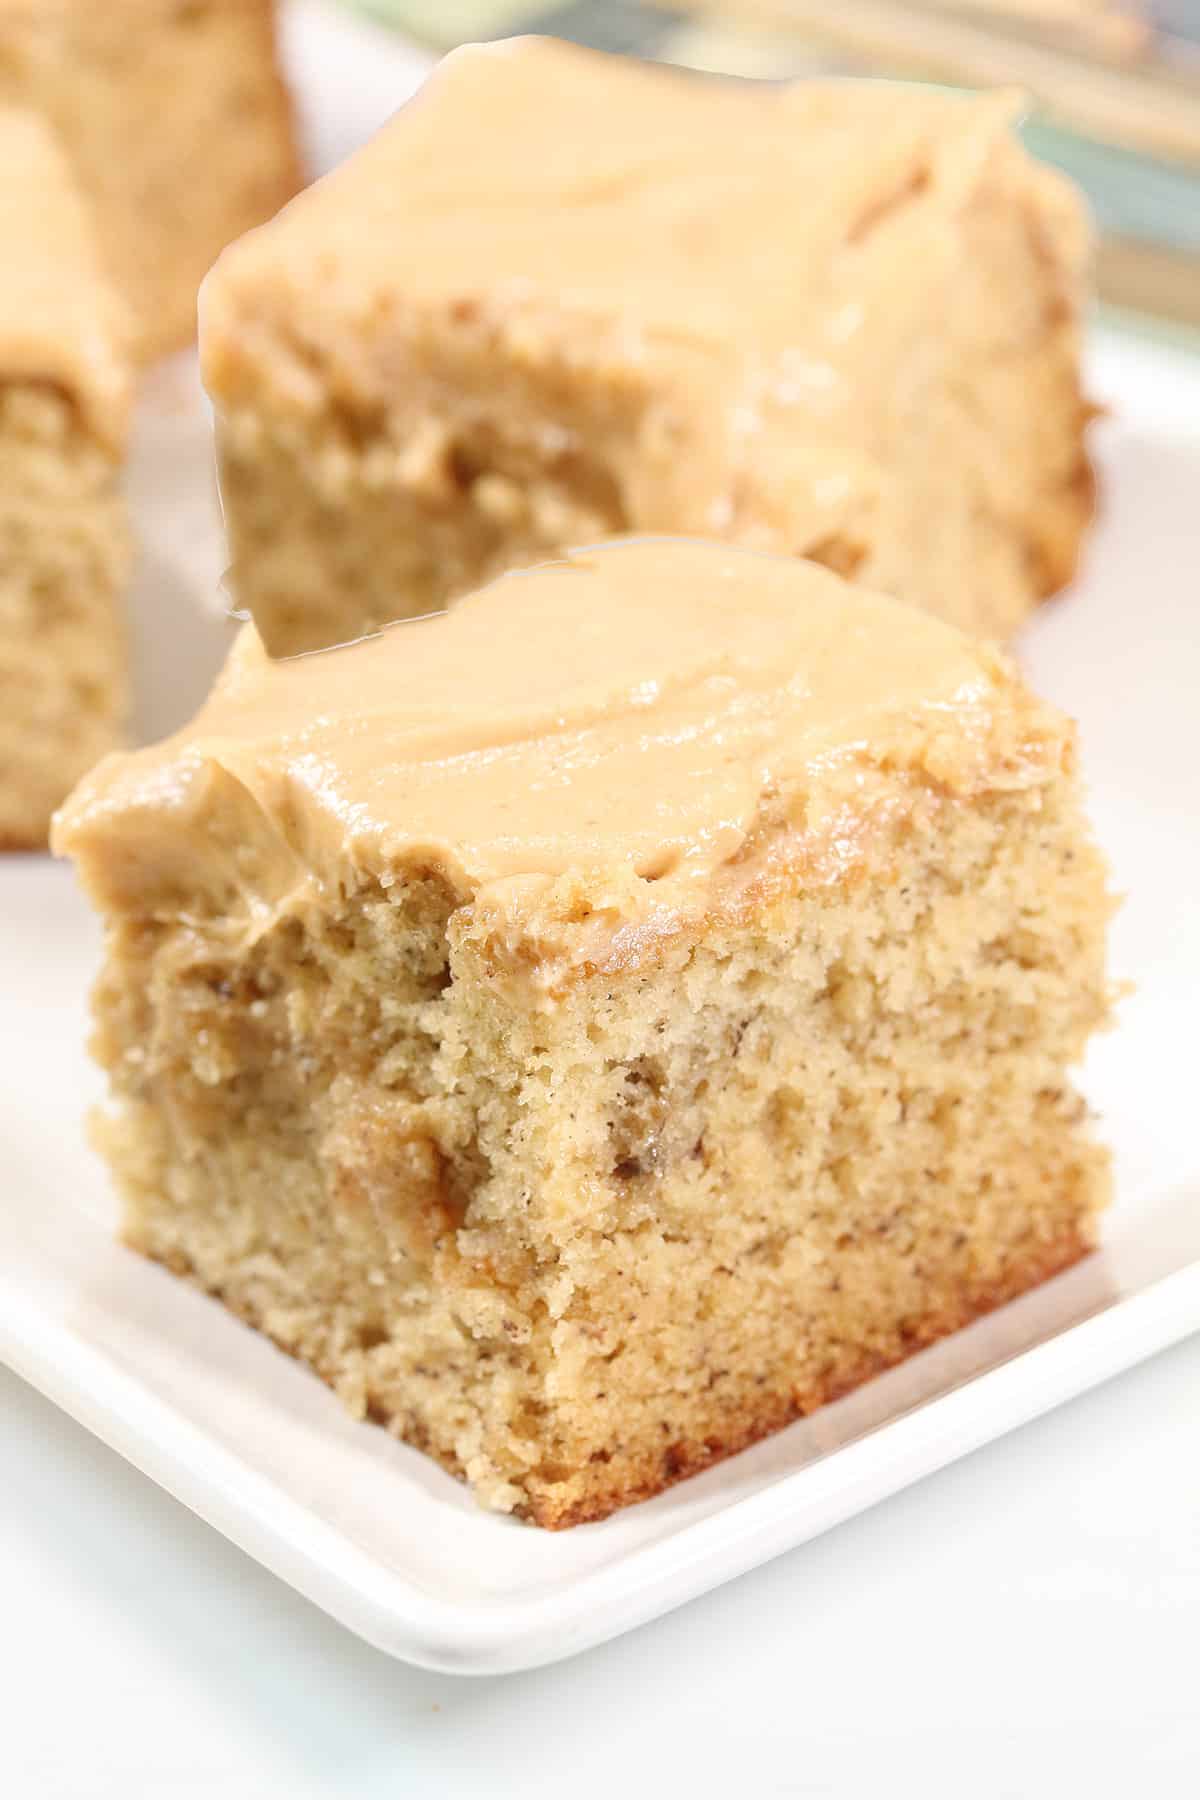 Closeup of snack cake with peanut butter frosting.